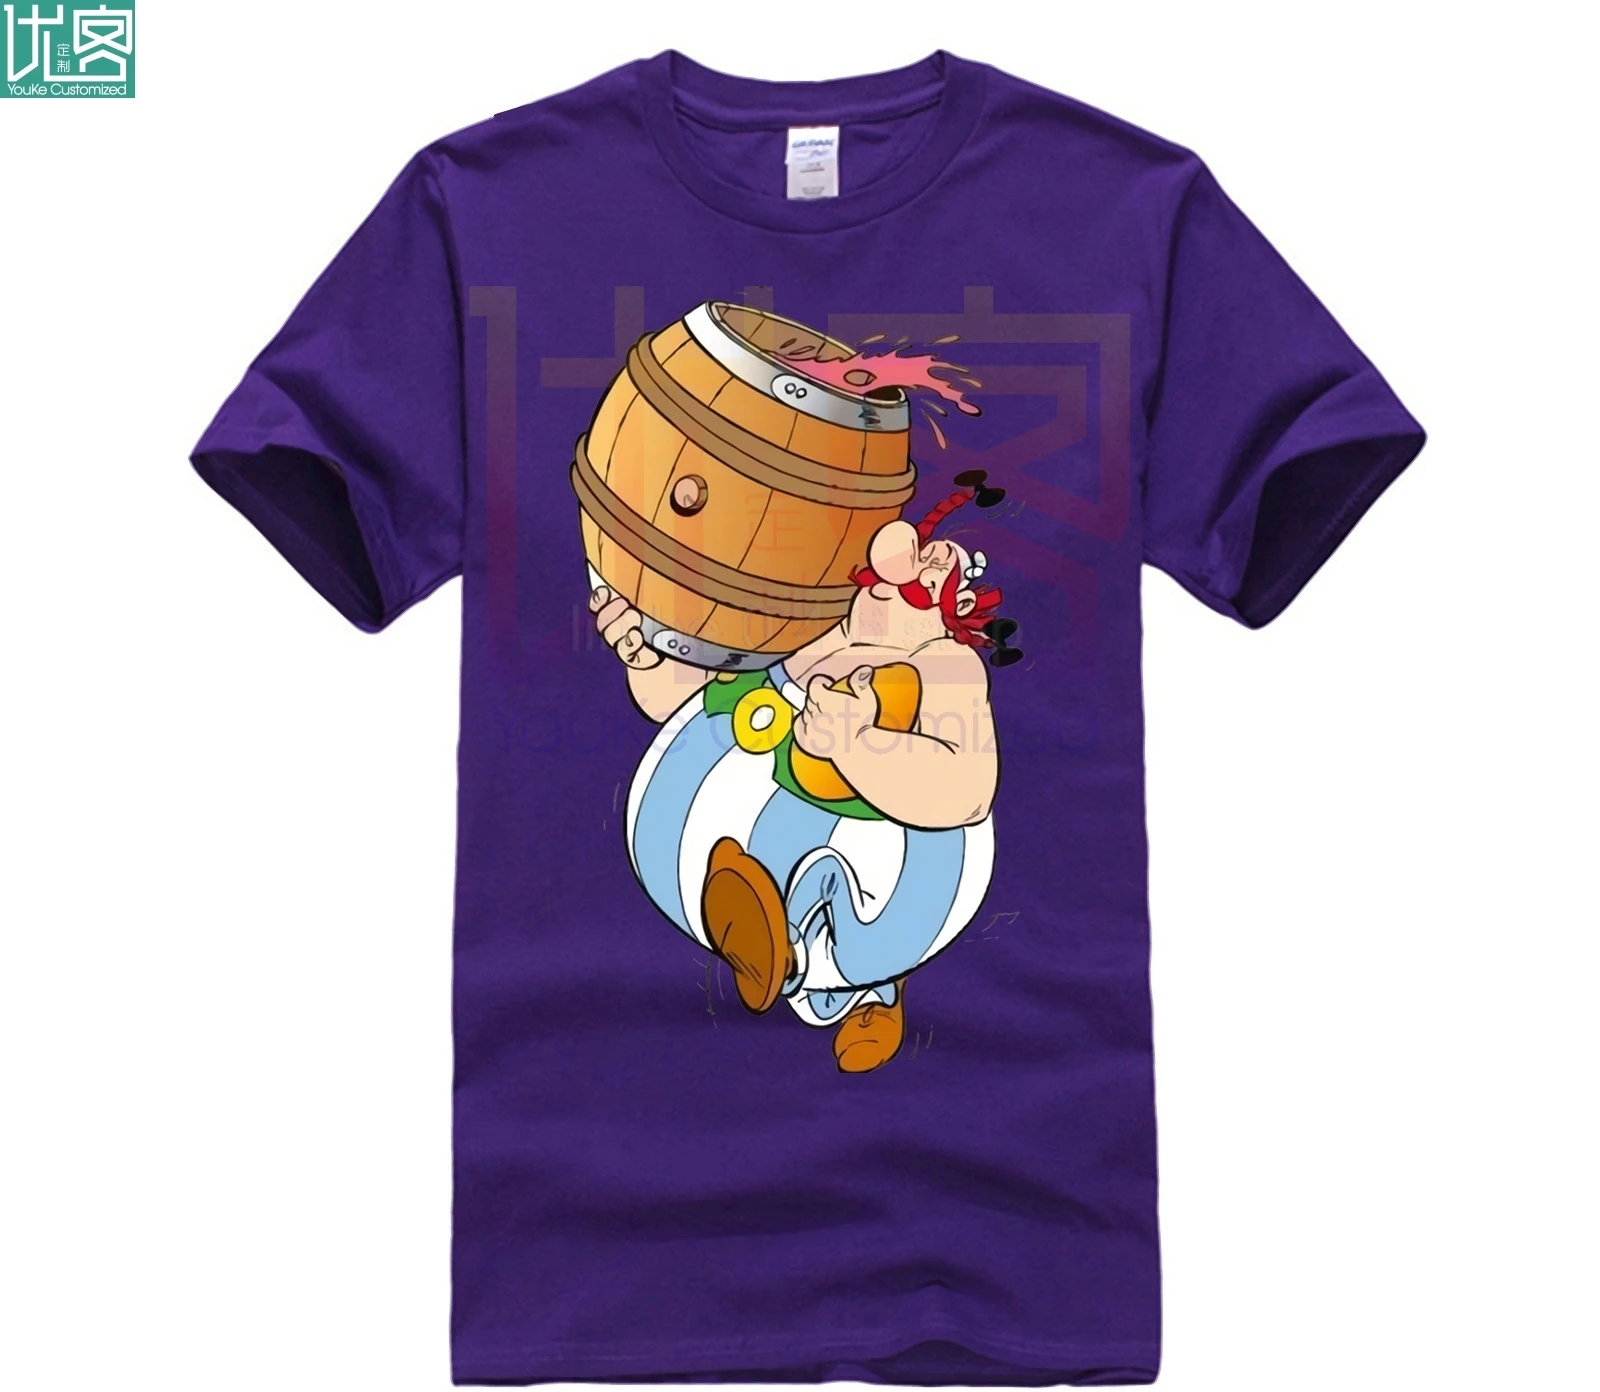 

Asterix & Obelix These Rugbymen Are Crazy Men's T-Shirt Short Sleeve T-shirt